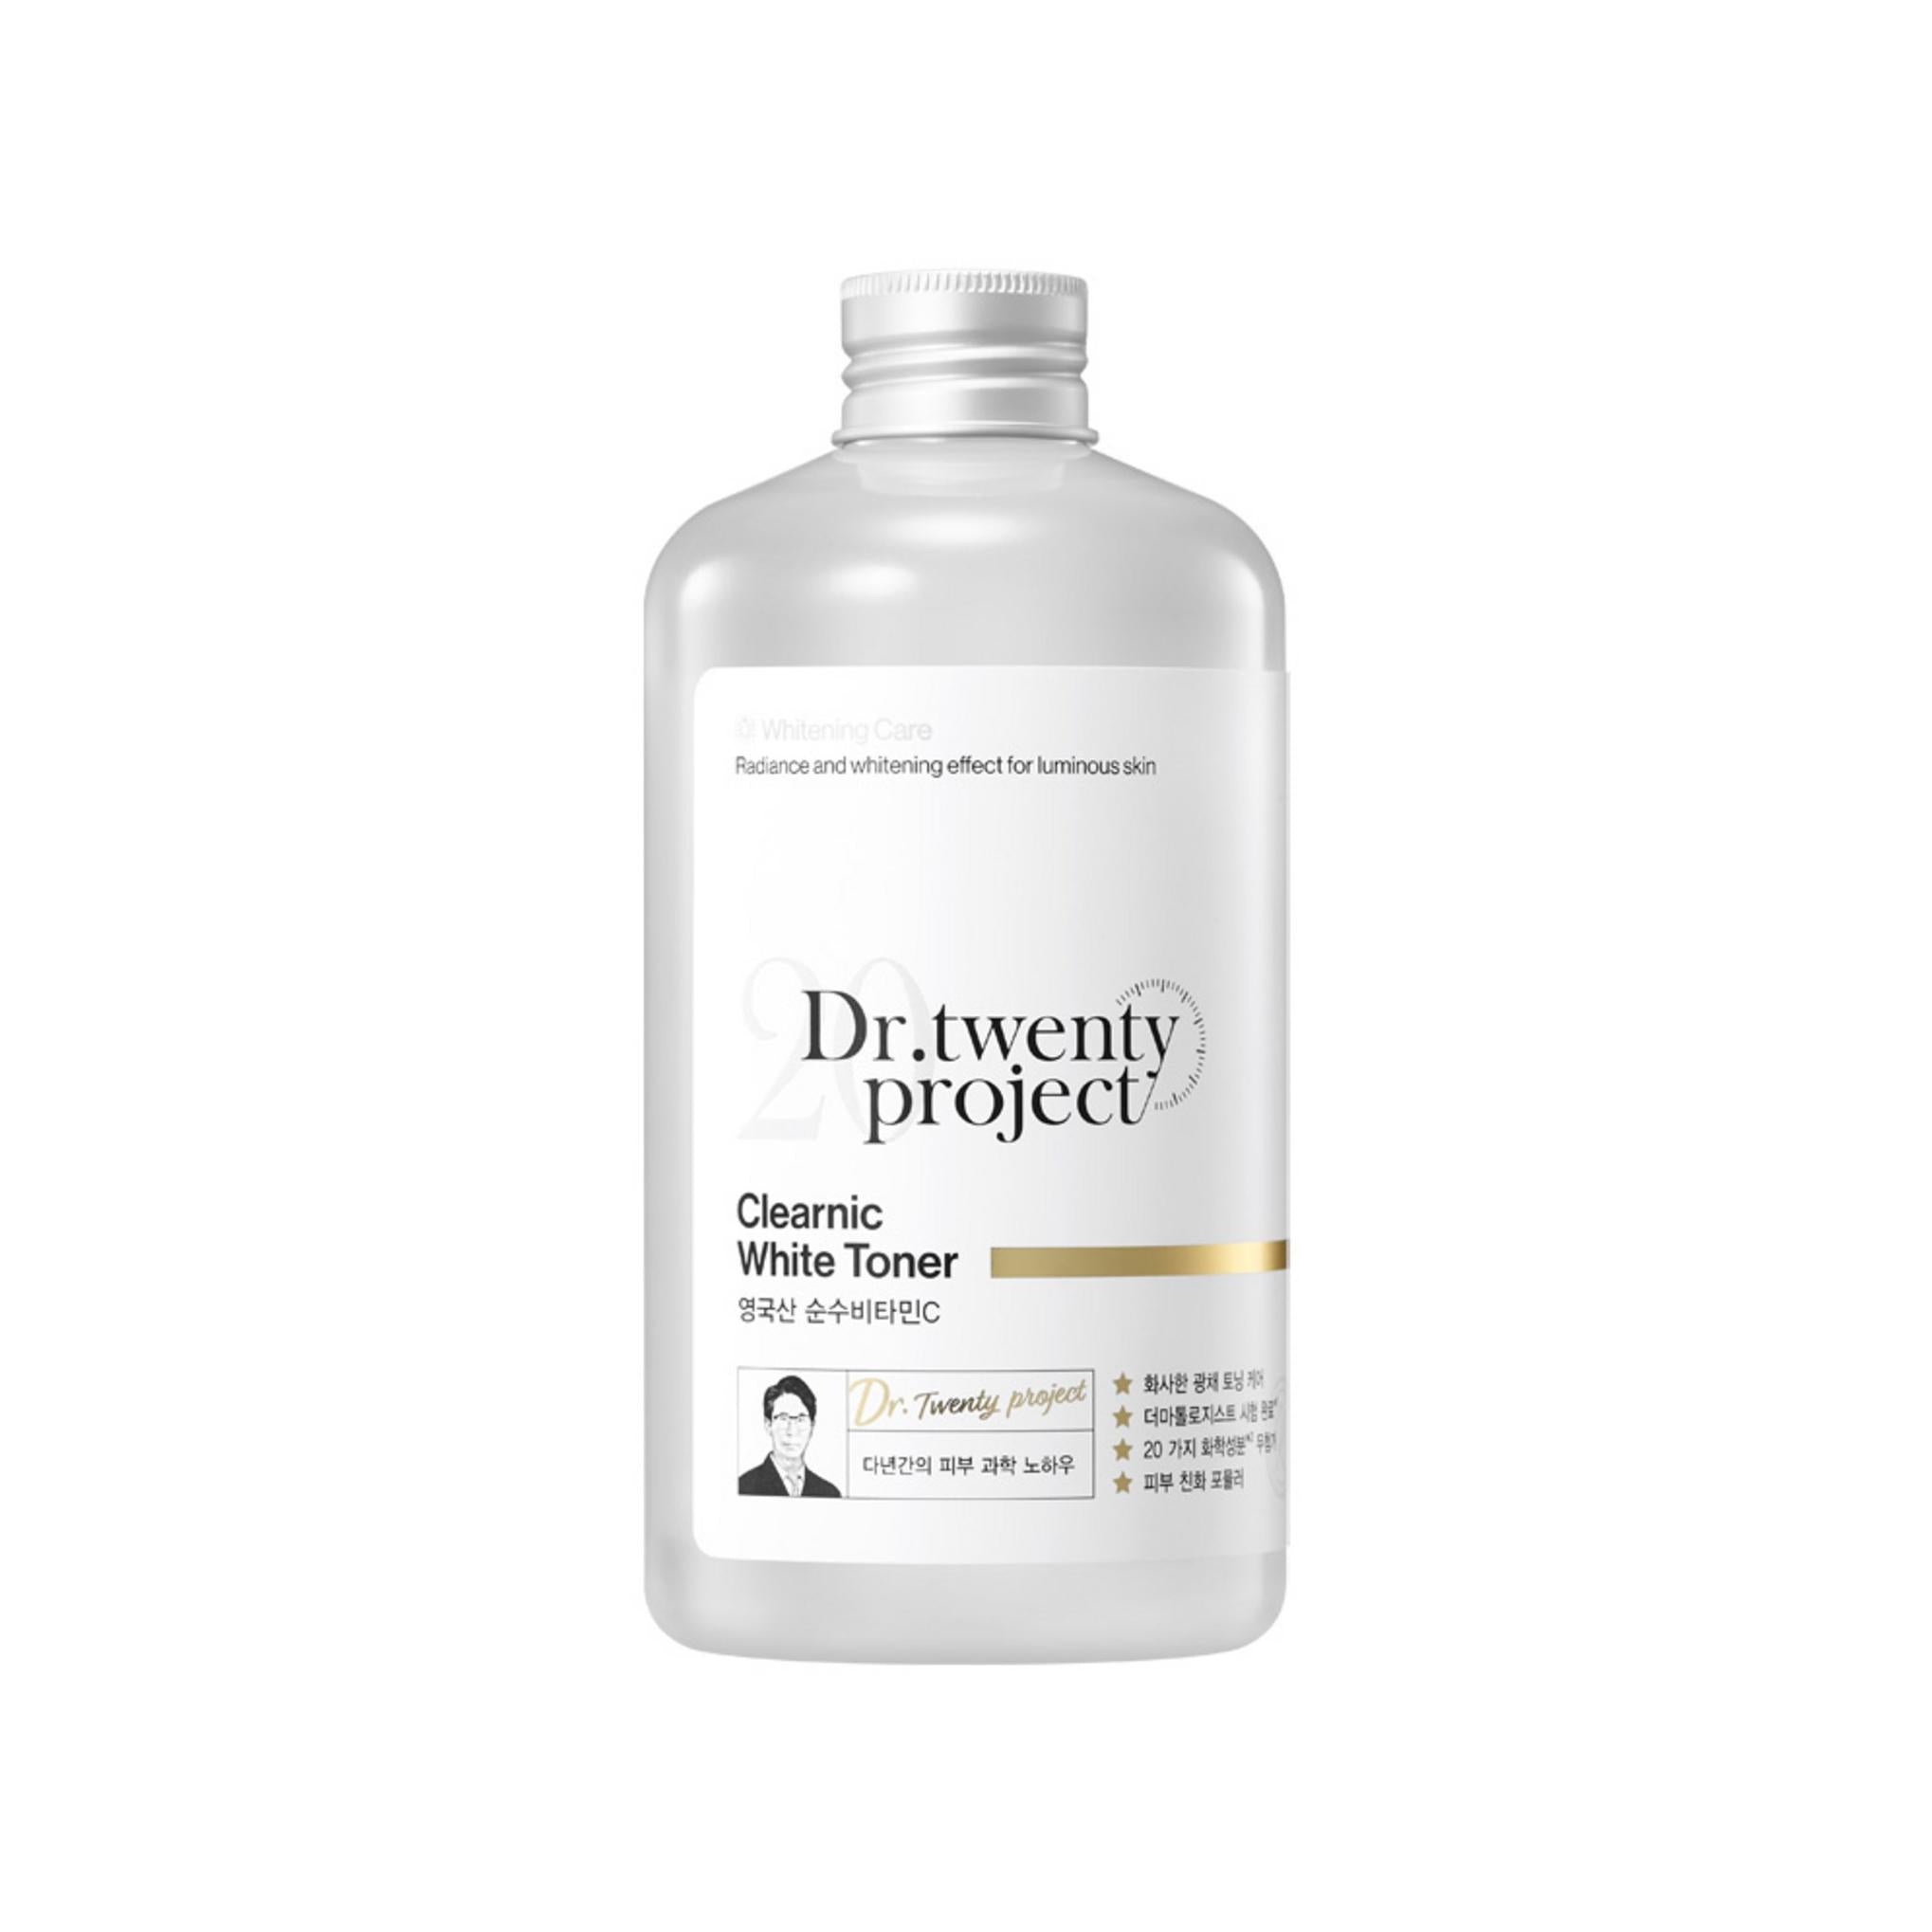 Dr. Twenty Project Clearnic White Toner